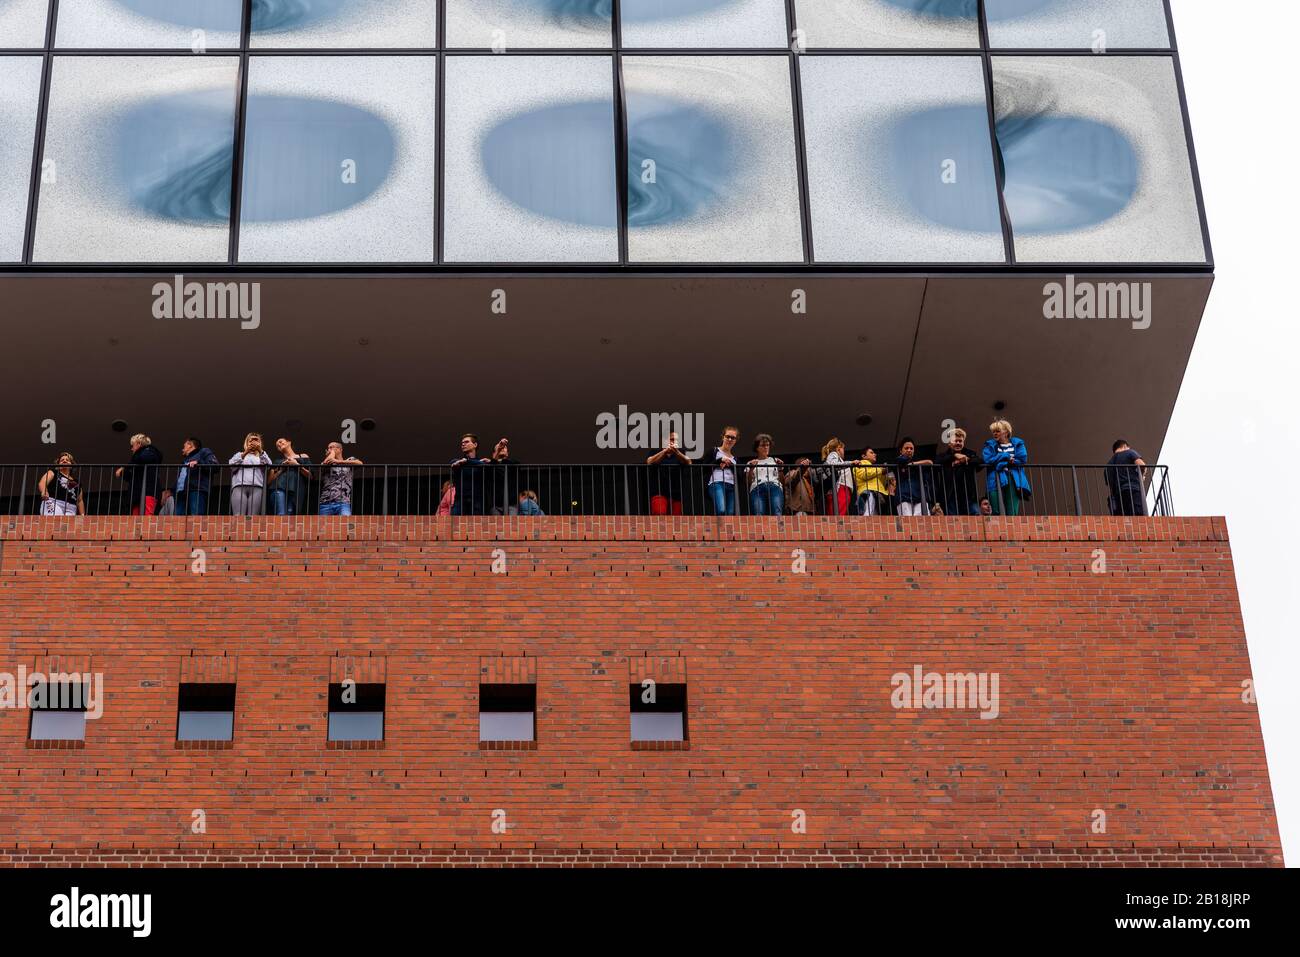 Hamburg, Germany - August 4, 2019: Low angle view of peopkle looking down from the terrace of Elbphilharmonie or Elbe Philharmonic Hall Stock Photo